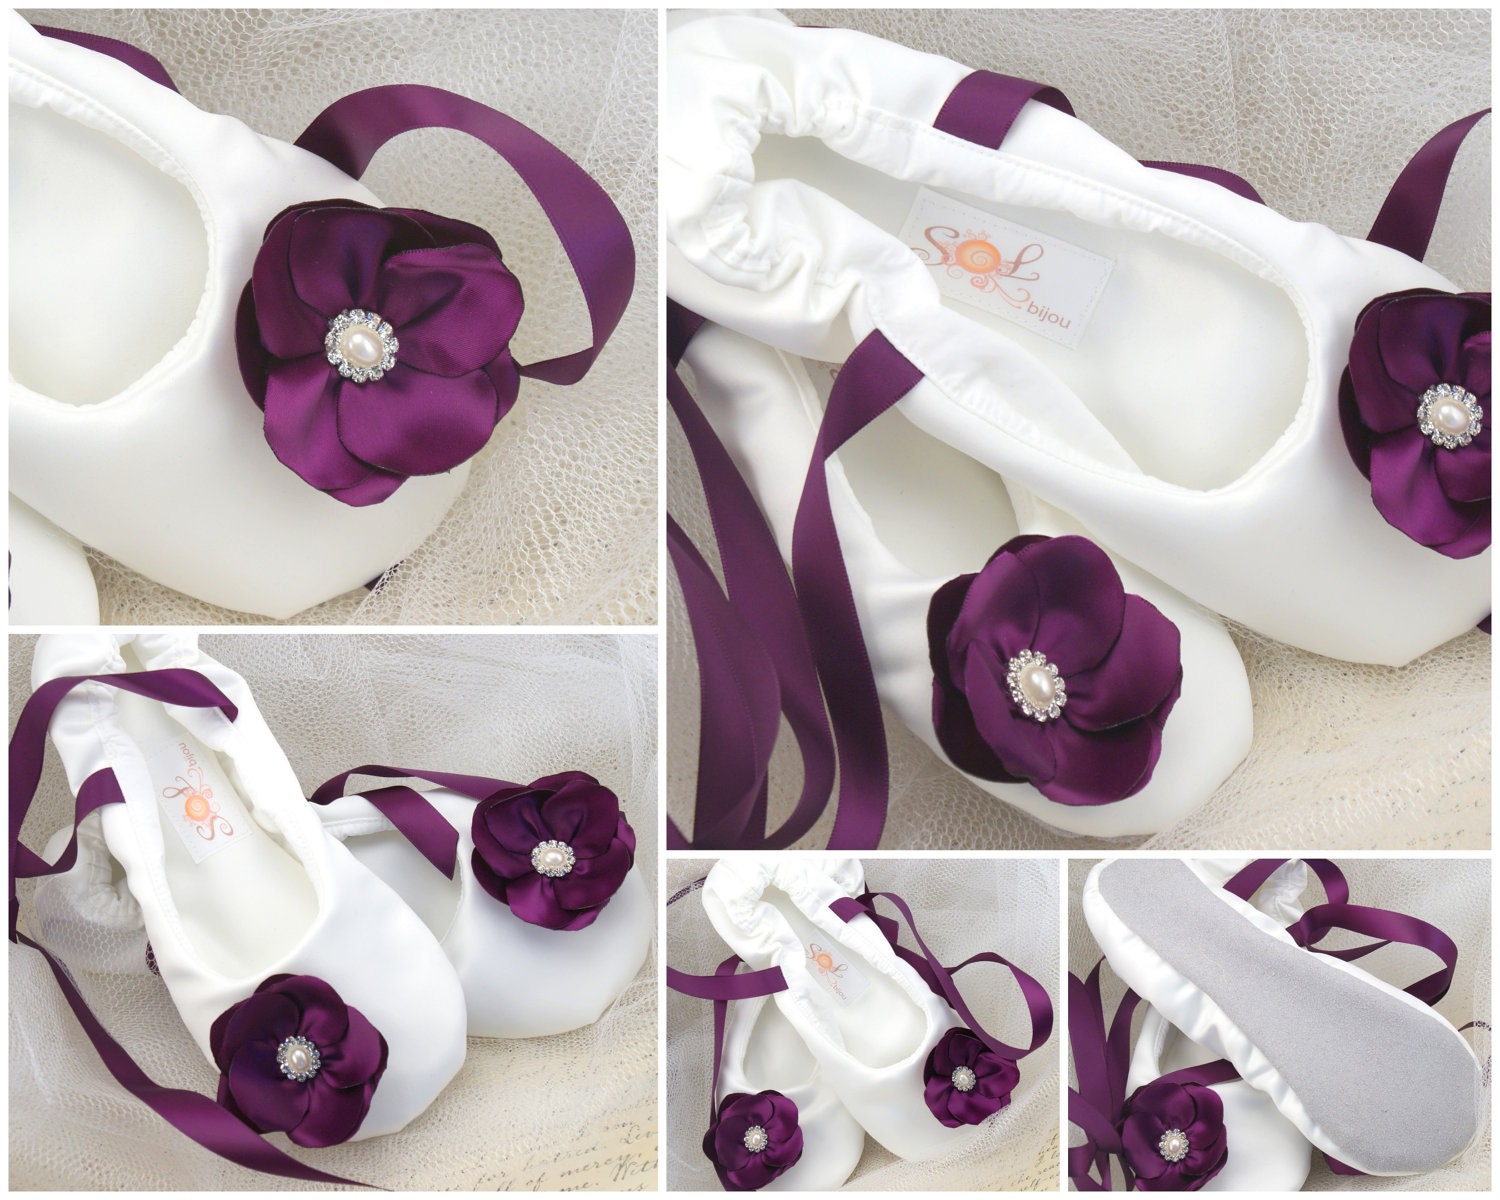 Bridal Ballerina Slippers Bridal Flats in Plum and Ivory with Satin Flower